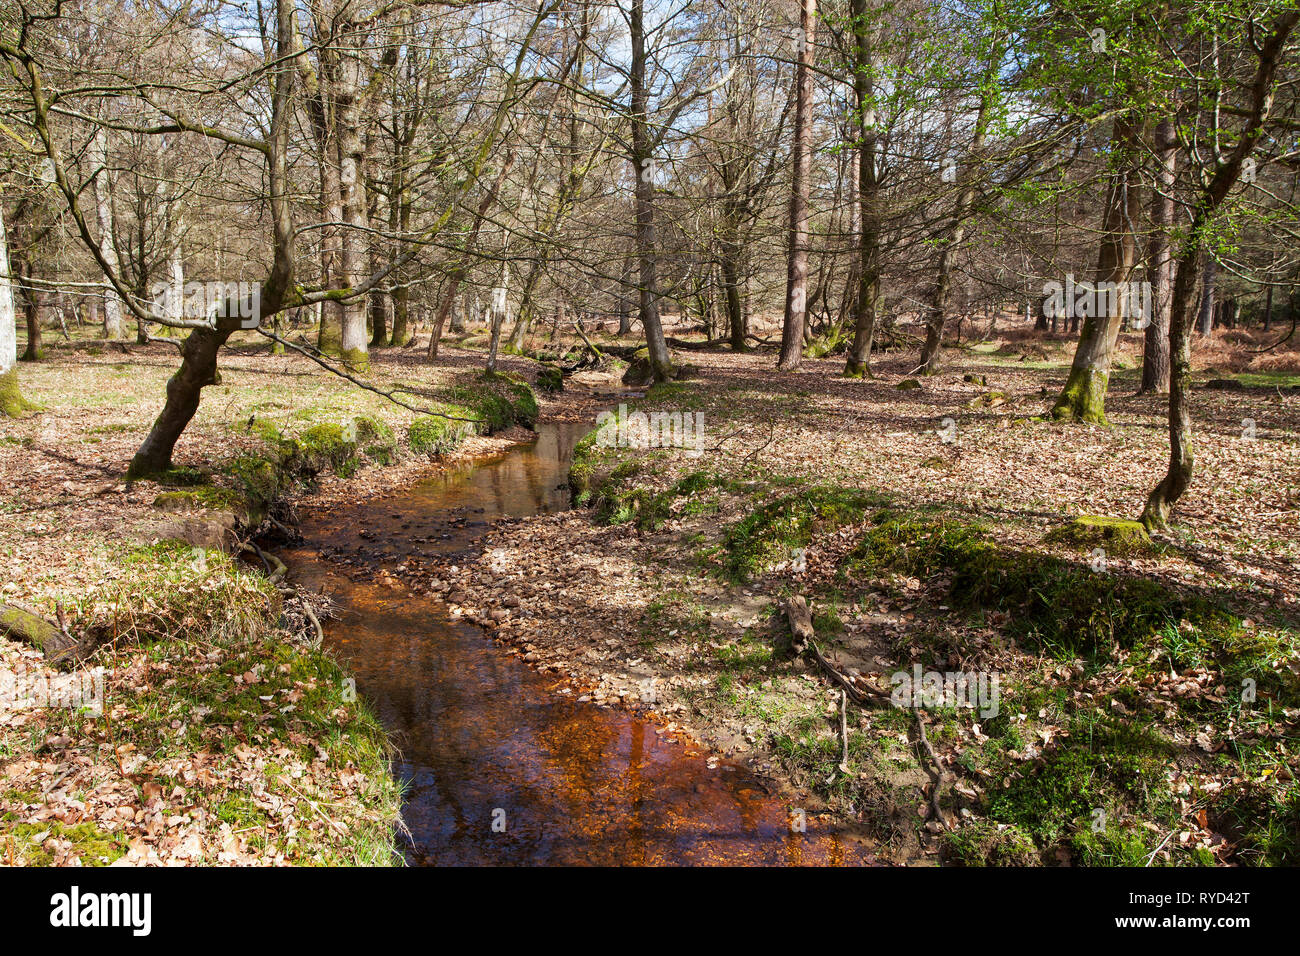 Latchmore Bach, Inseln Dornen Inclosure, New Forest National Park, Hampshire, England, UK, April 2017 Stockfoto